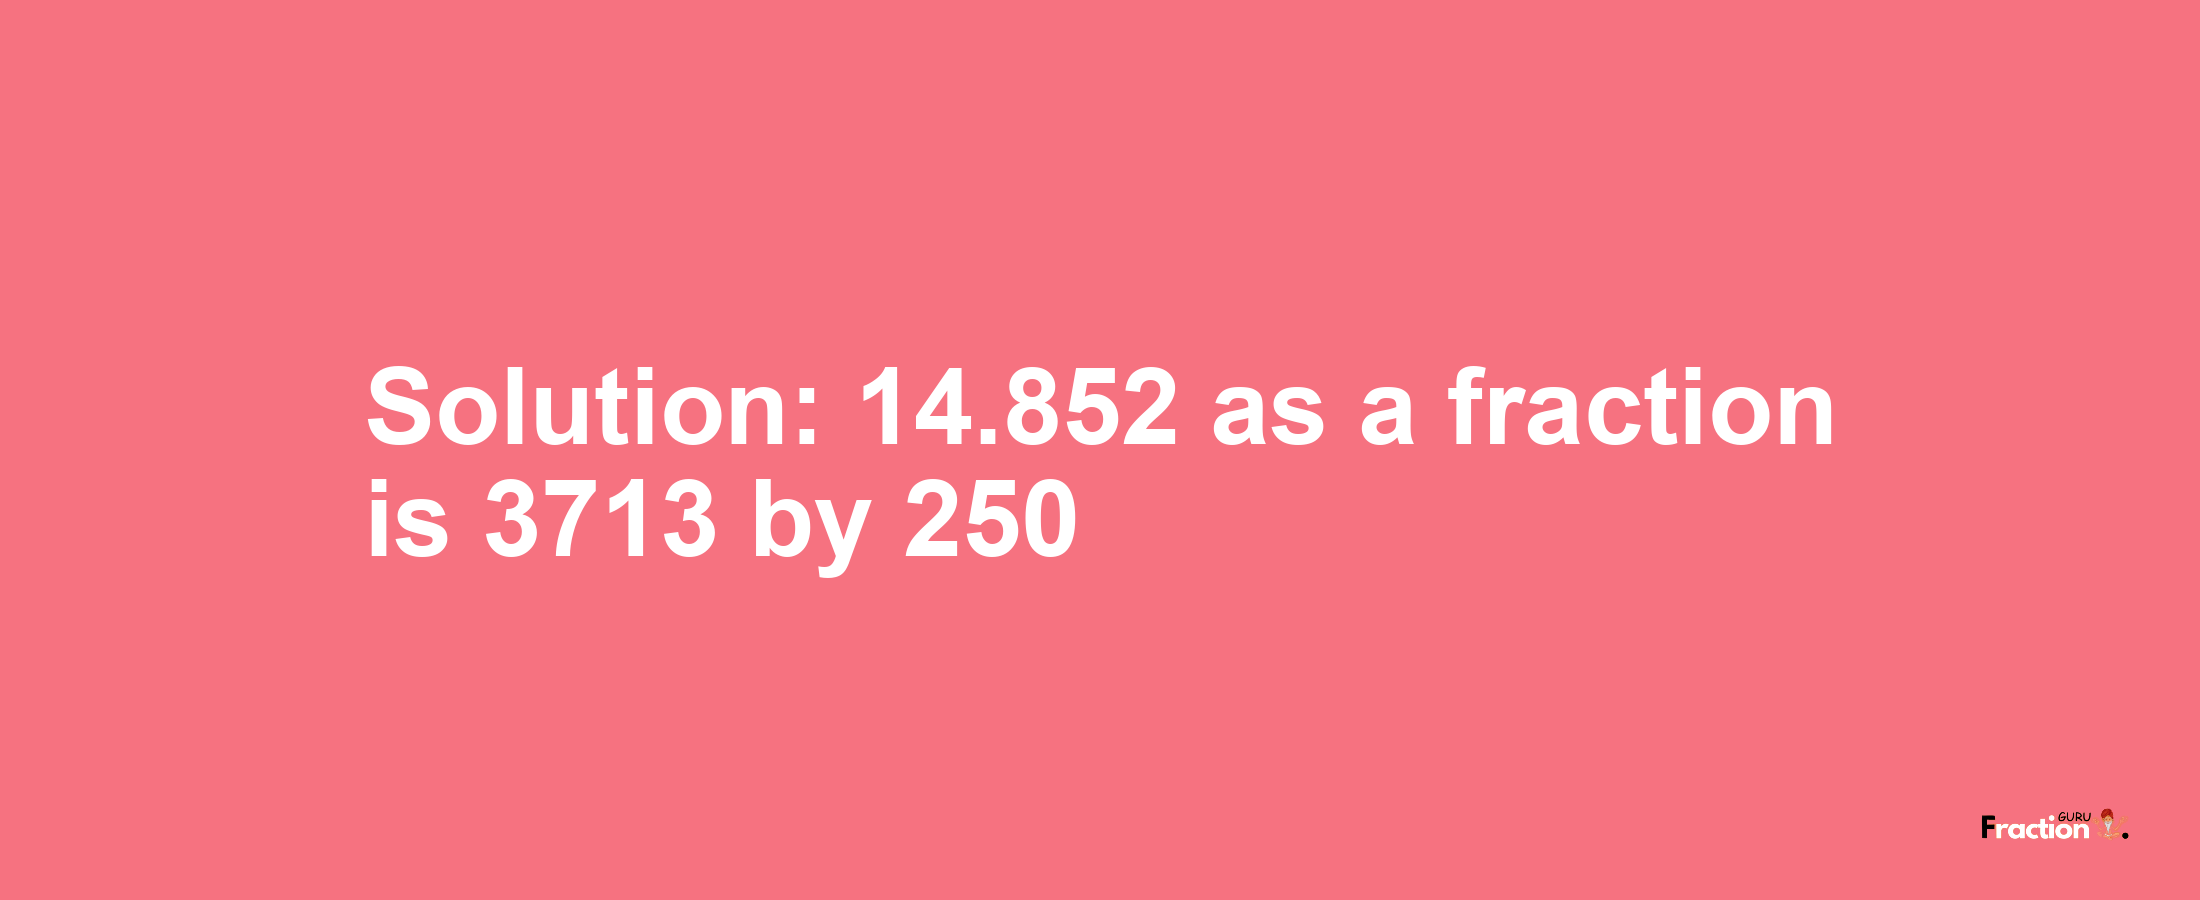 Solution:14.852 as a fraction is 3713/250